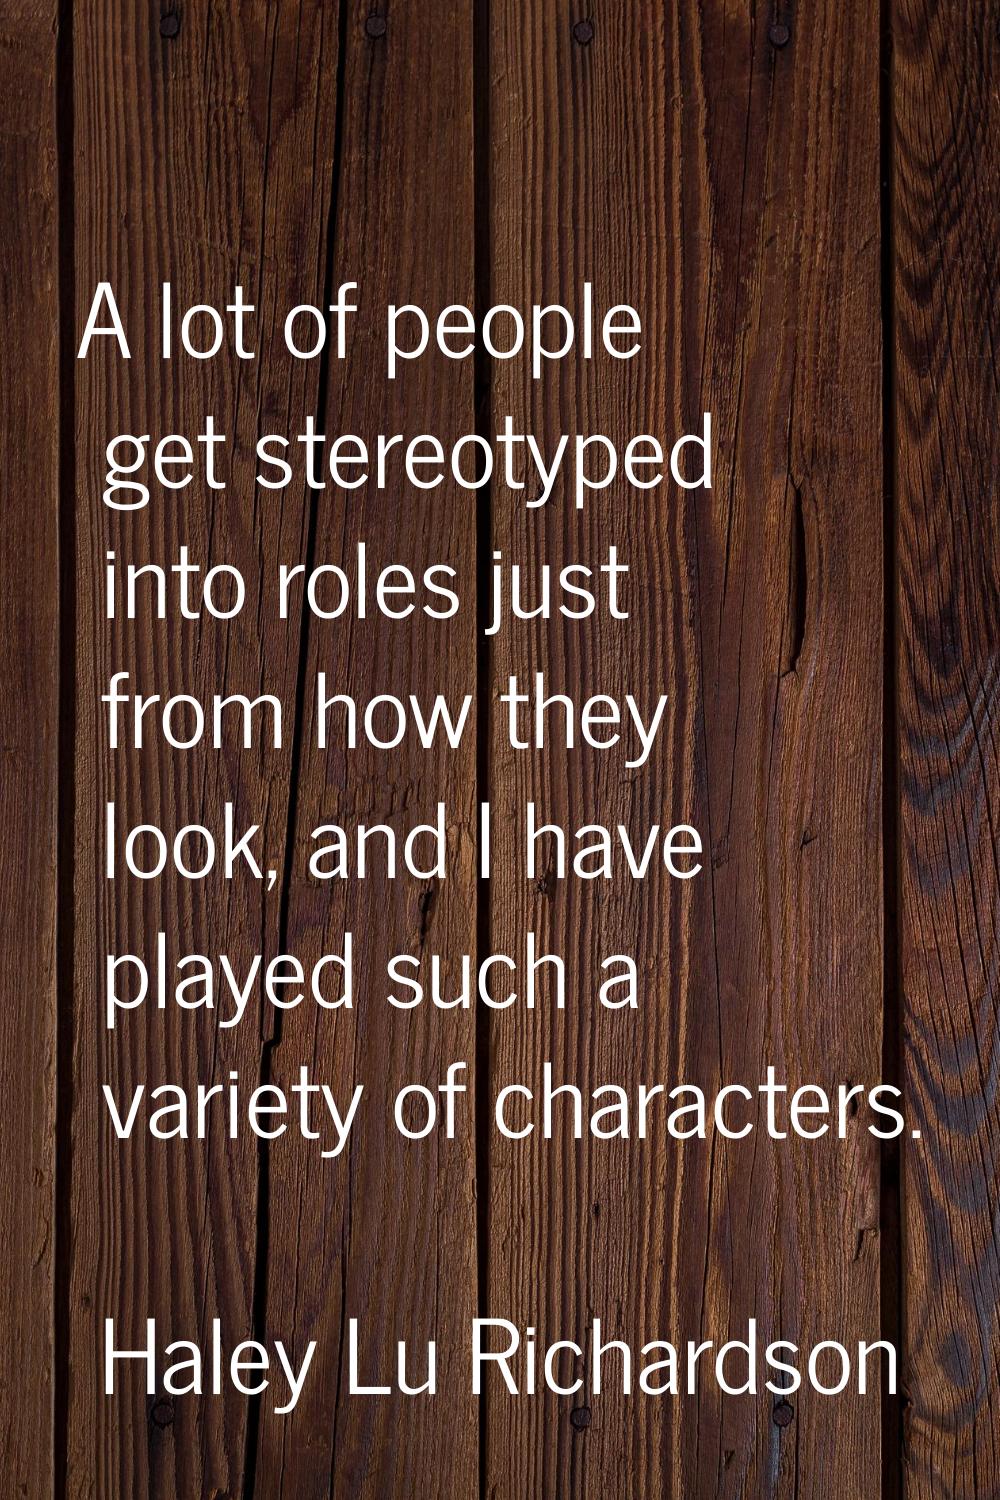 A lot of people get stereotyped into roles just from how they look, and I have played such a variet